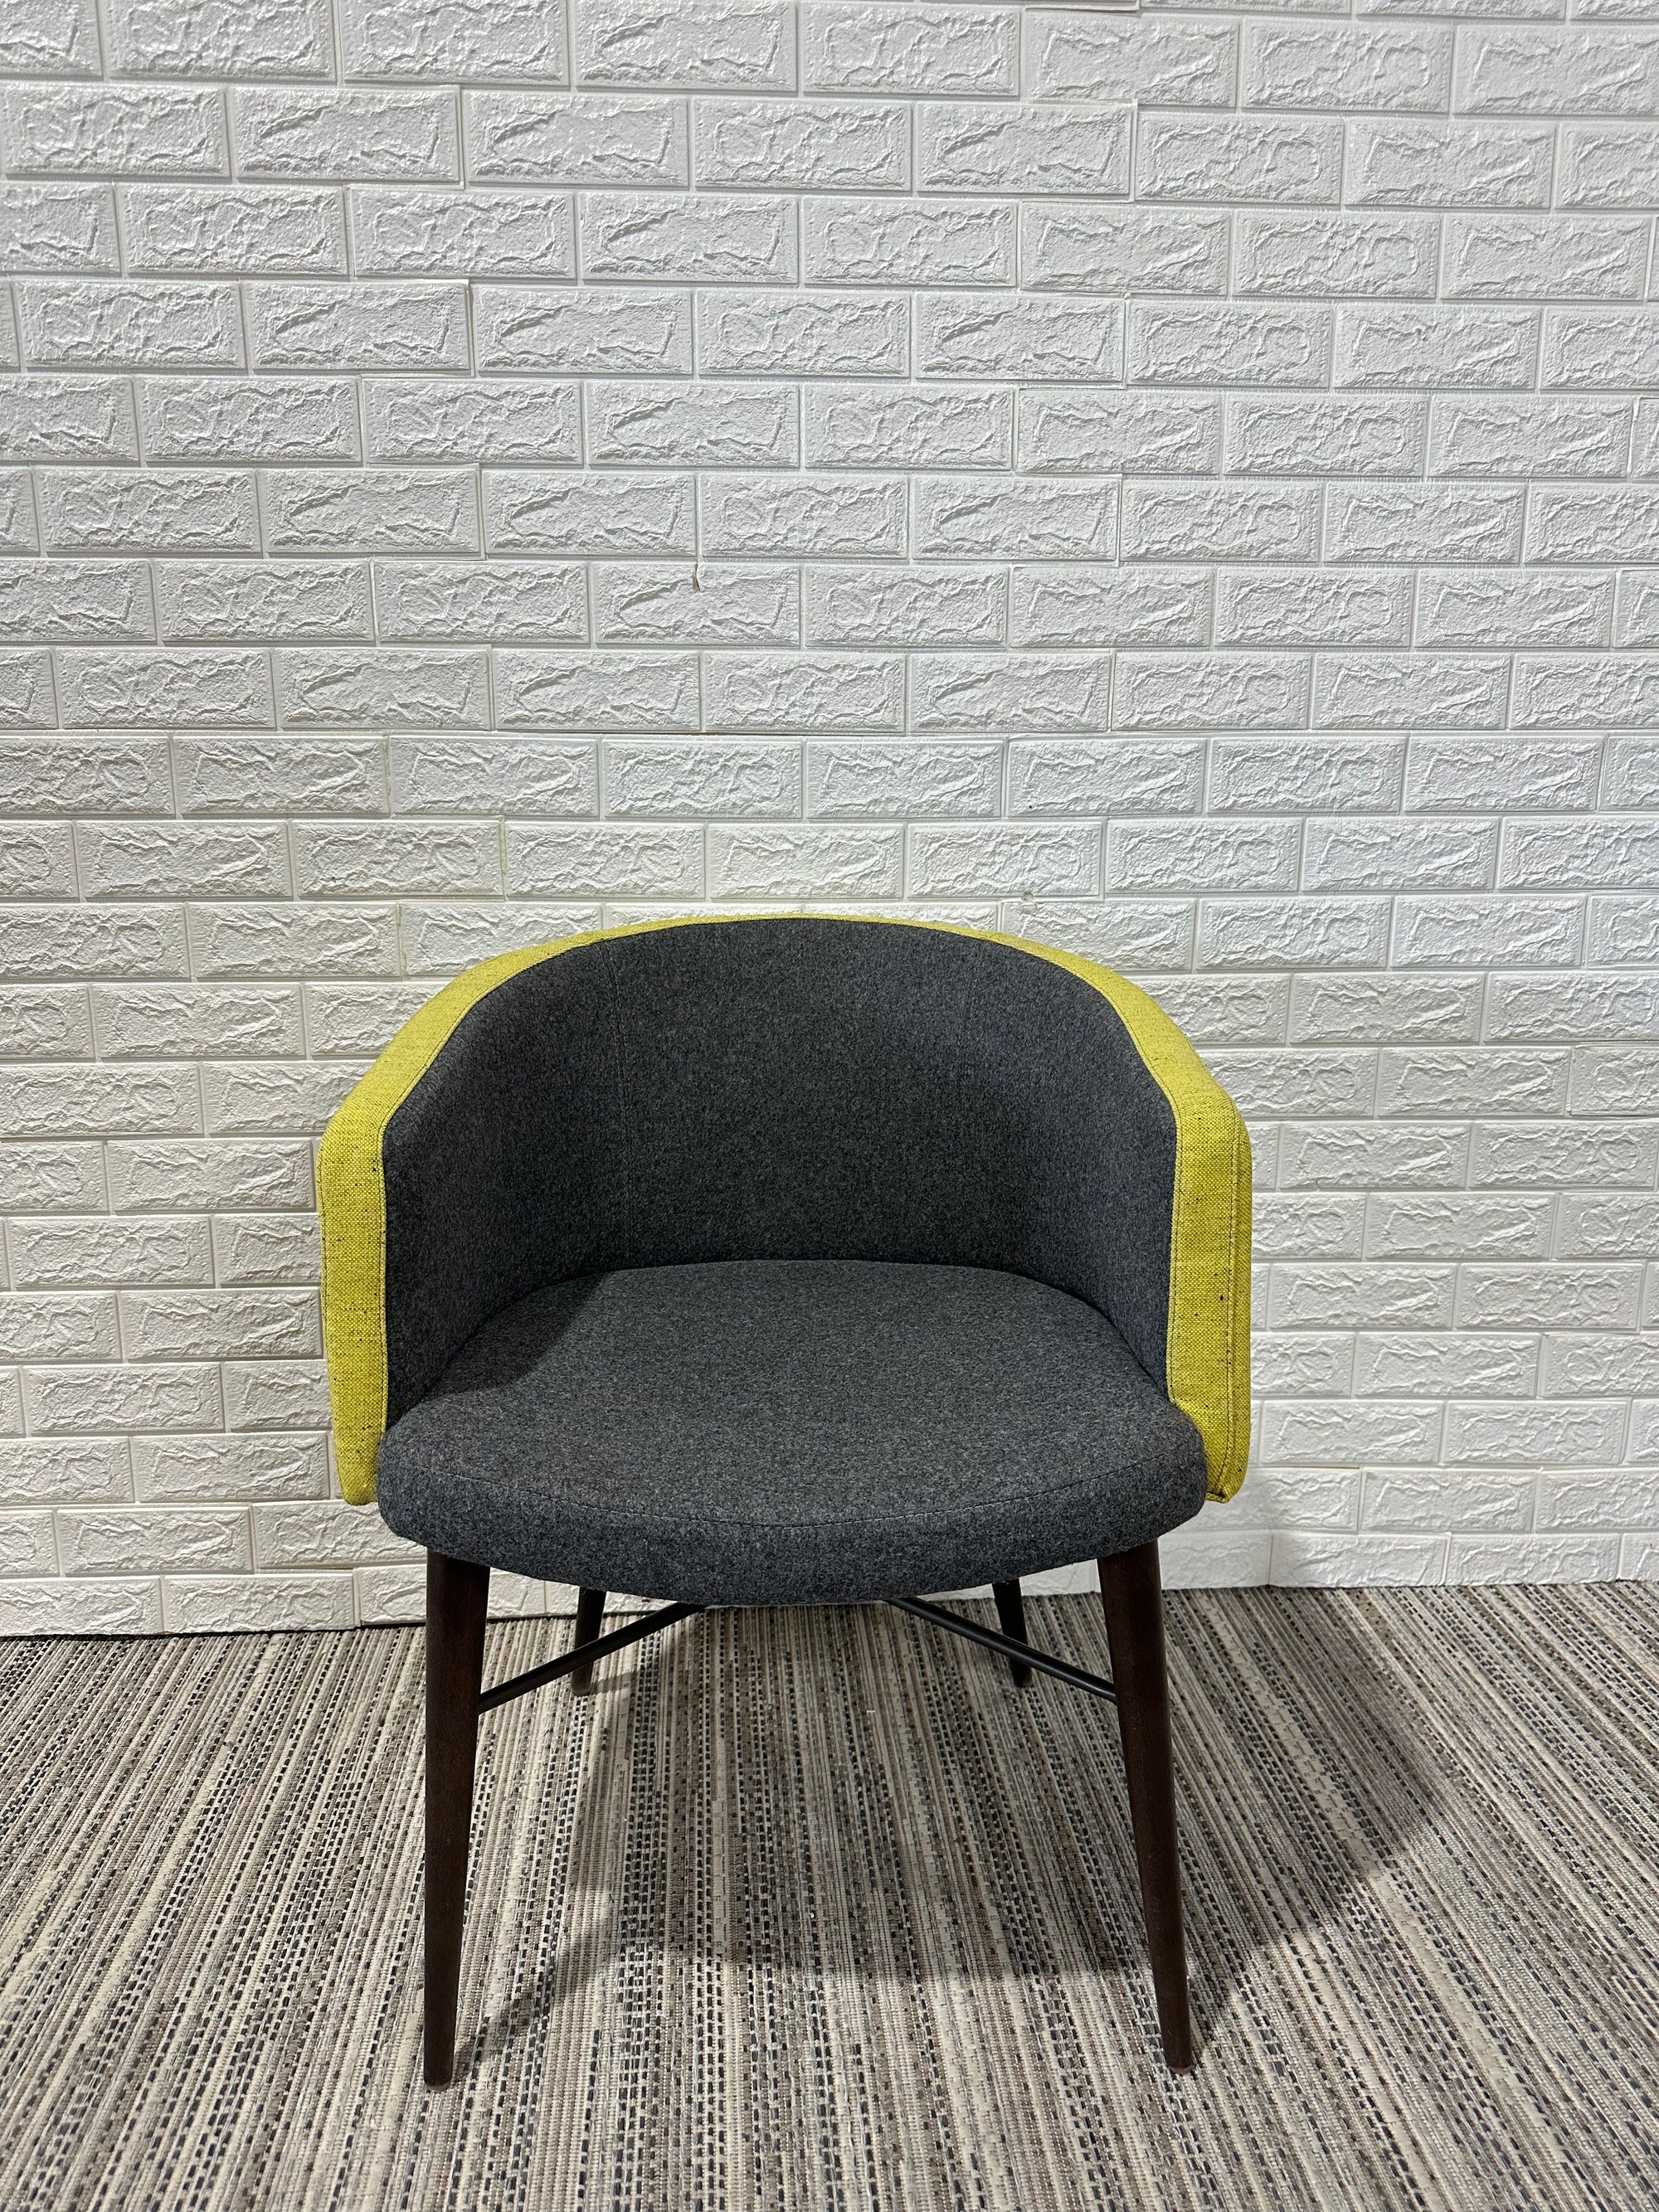 Pre-Owned Green Side Chair - Duckys Office Furniture